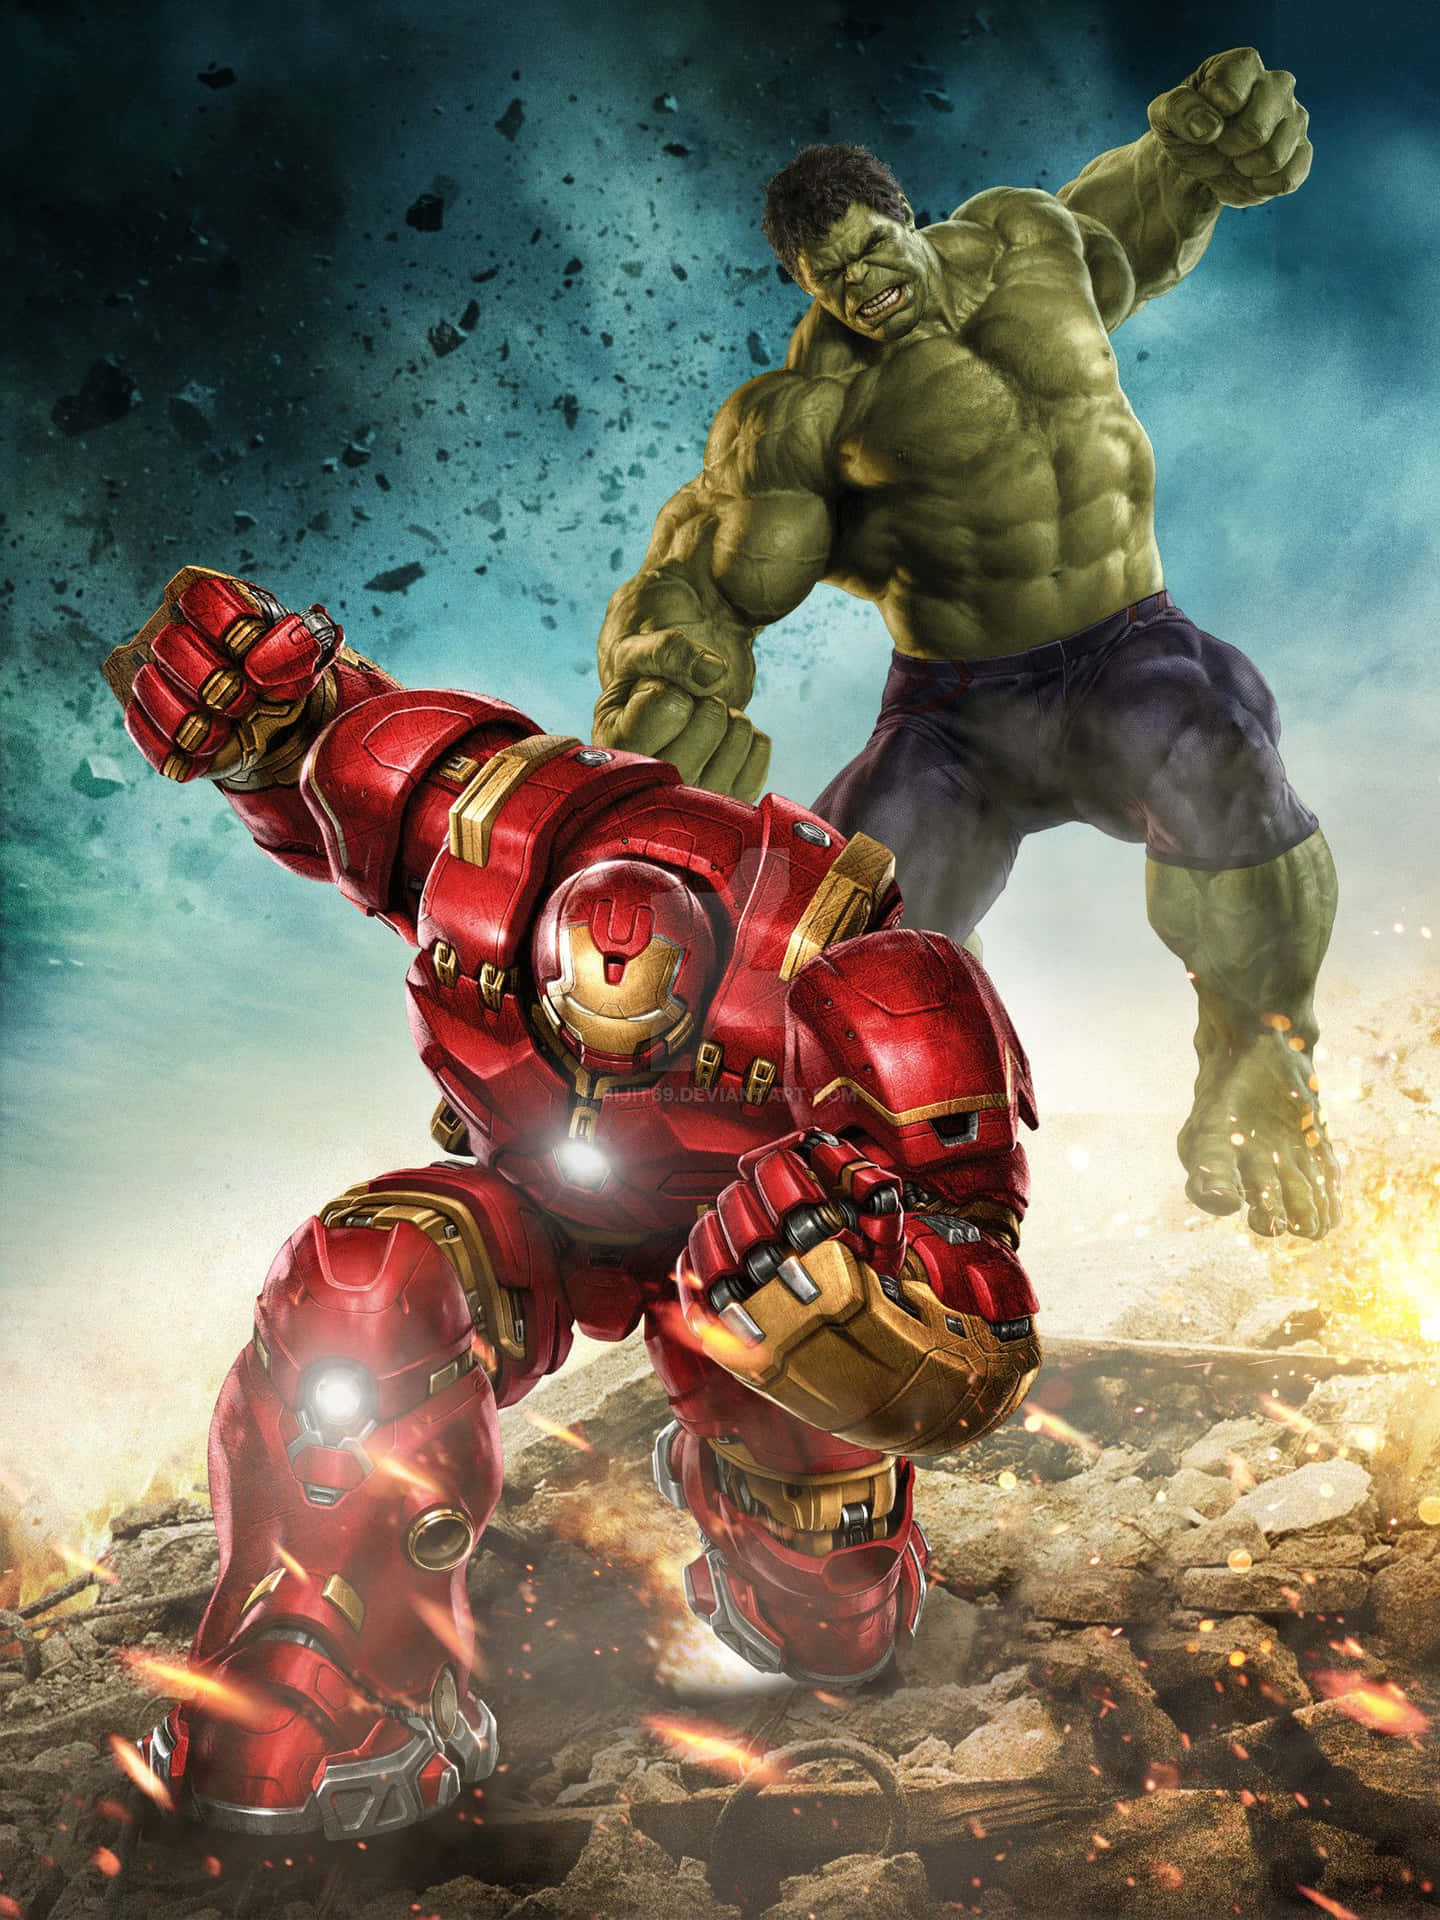 Iron Man and the Hulk face off in an epic battle Wallpaper